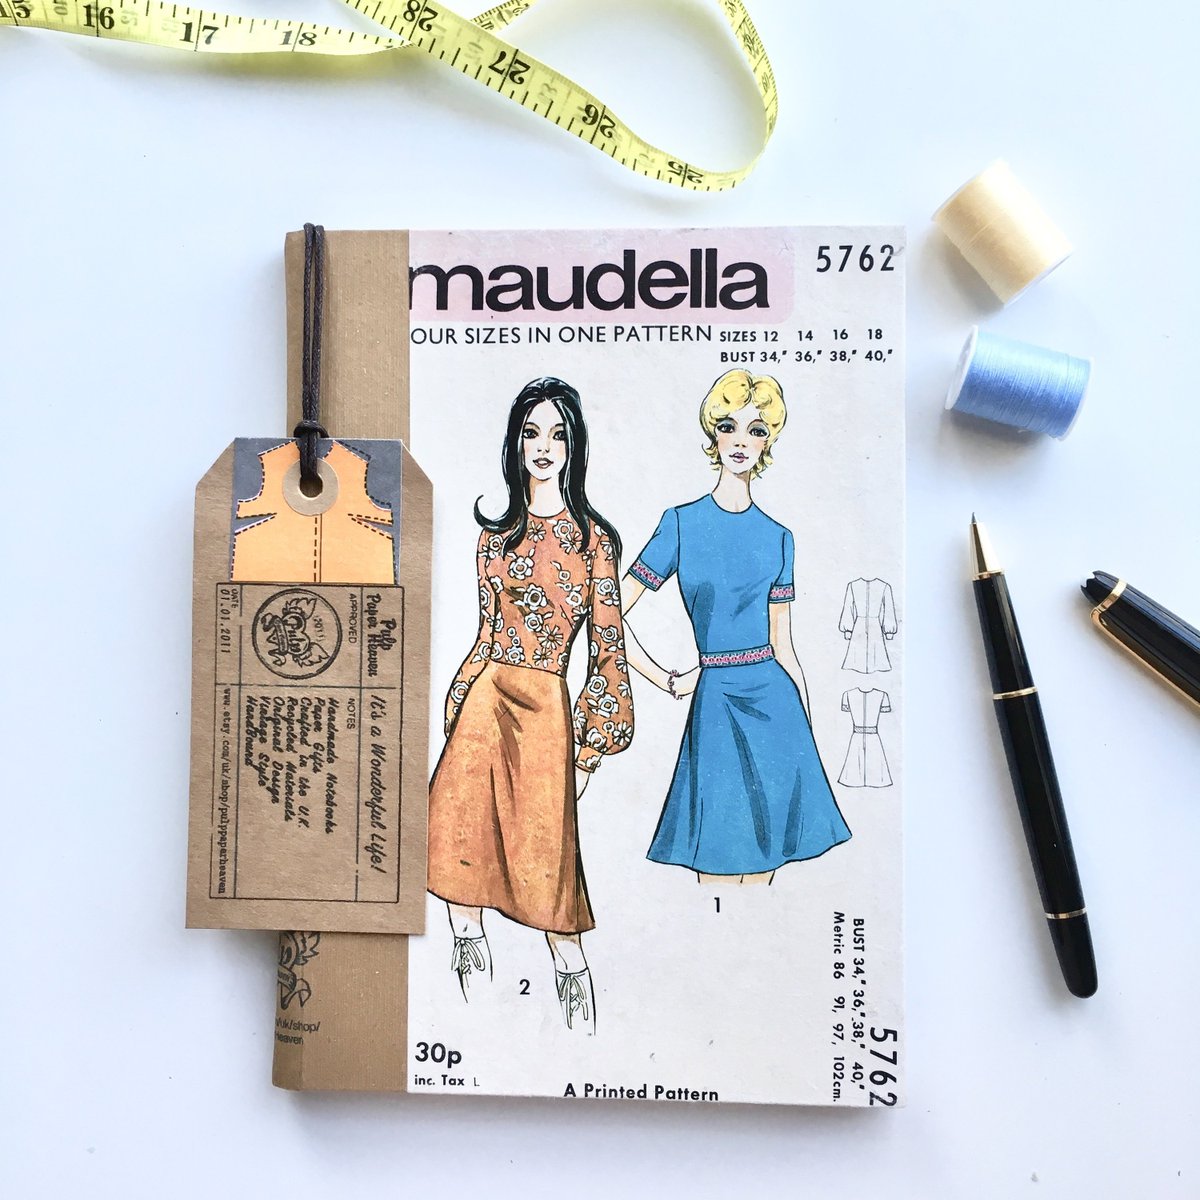 I'm adding fresh from the press notebooks to my Etsy shop etsy.me/2SiHvau like this SEWING PATTERN NOTEBOOK that reuses a vintage Maudella pattern #booksandzines #journal #birthday #christmas #dressmakersnotebook #vintageclothing #fashion #sewinggift